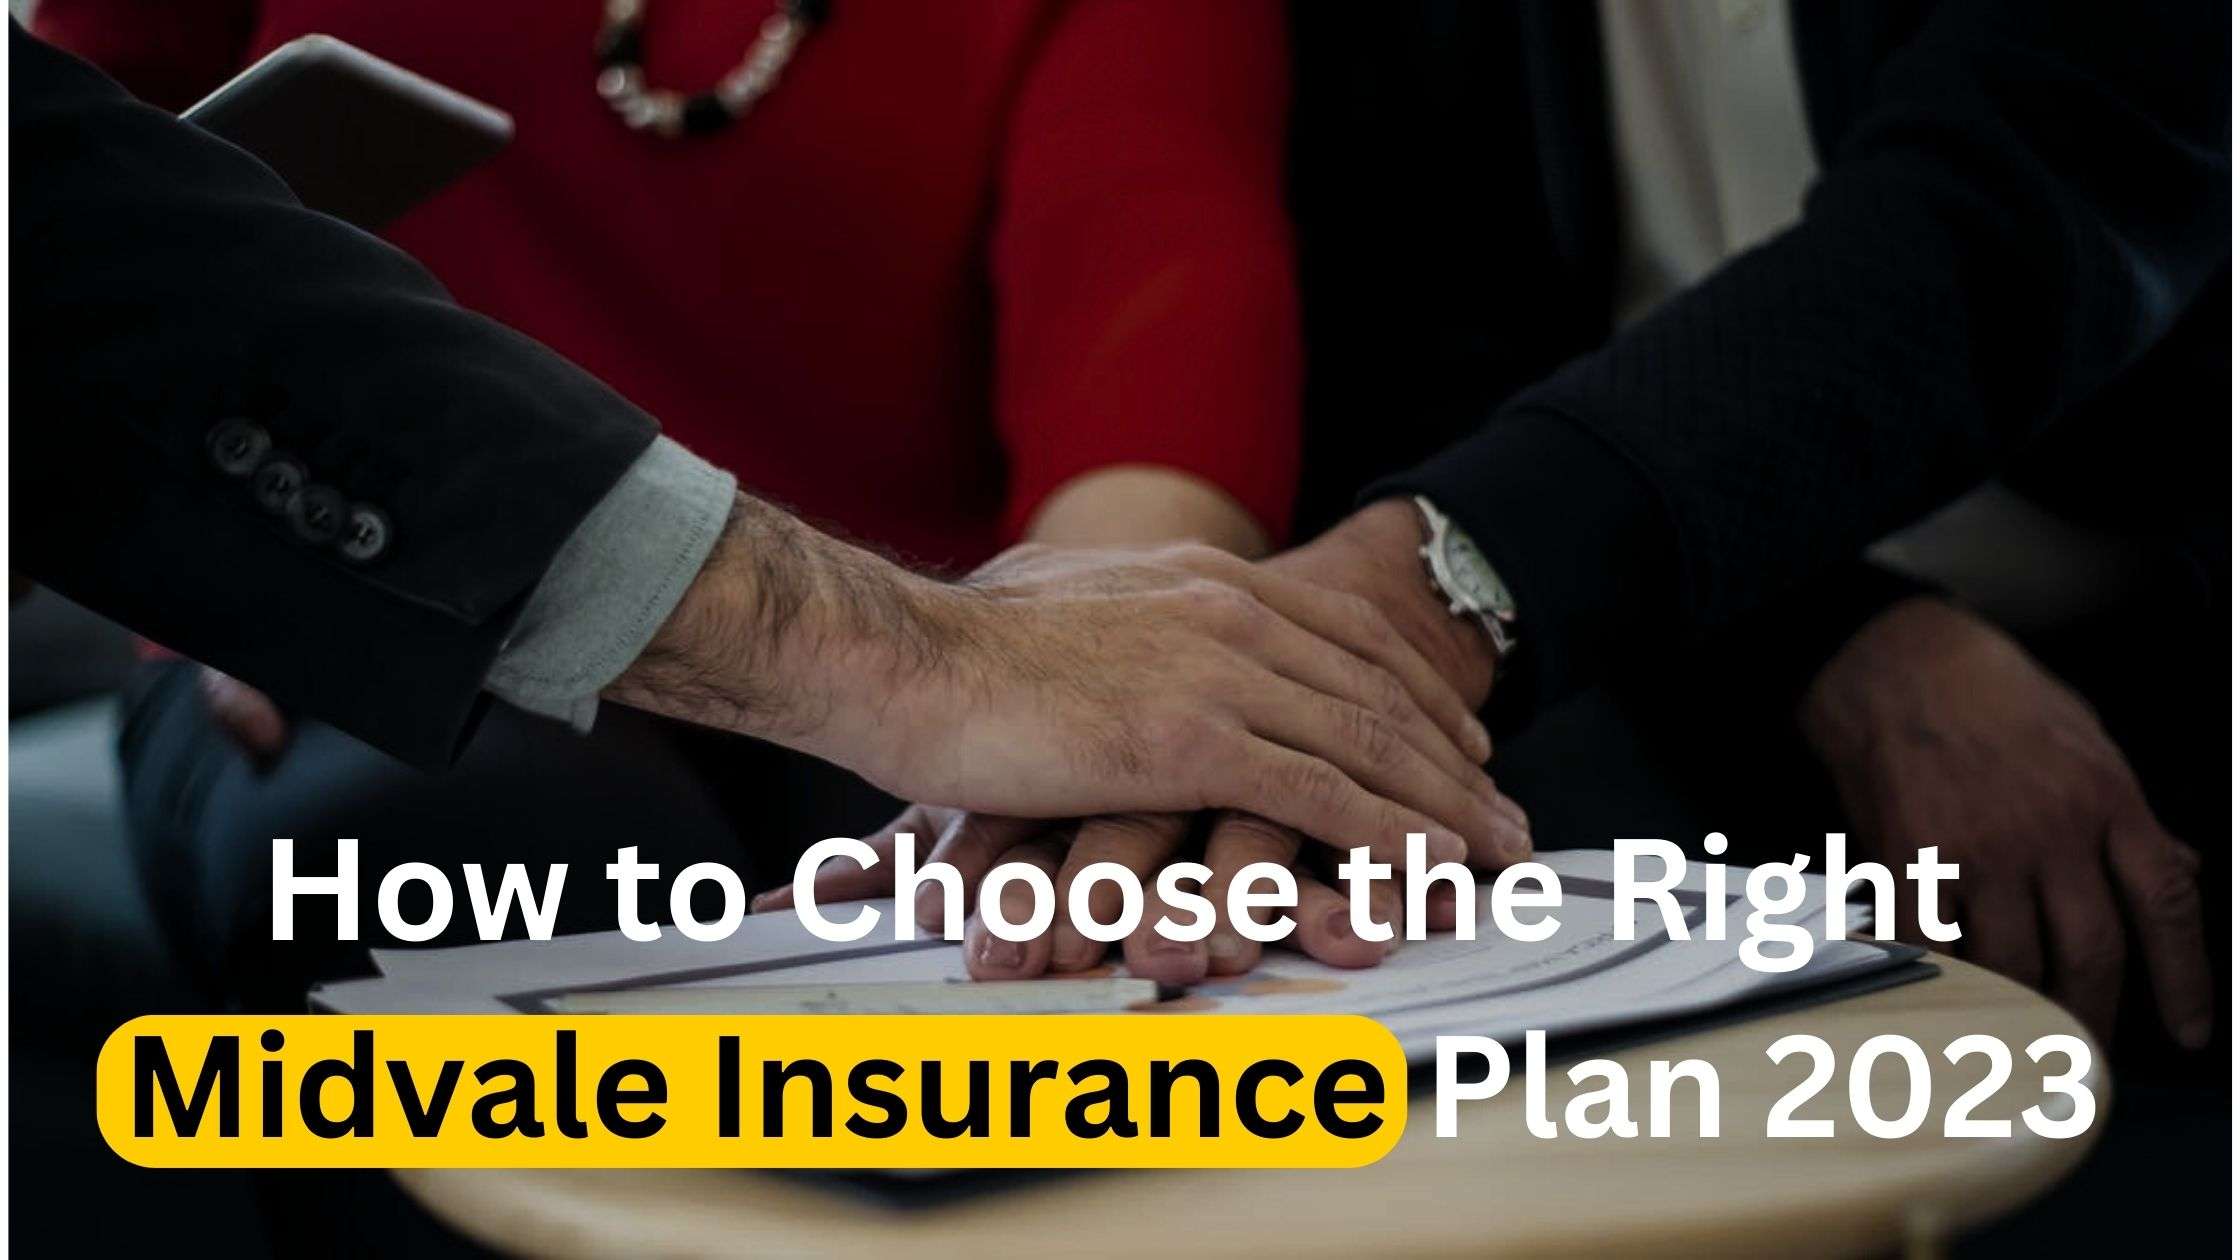 How to Choose the Right Midvale Insurance Plan 2023